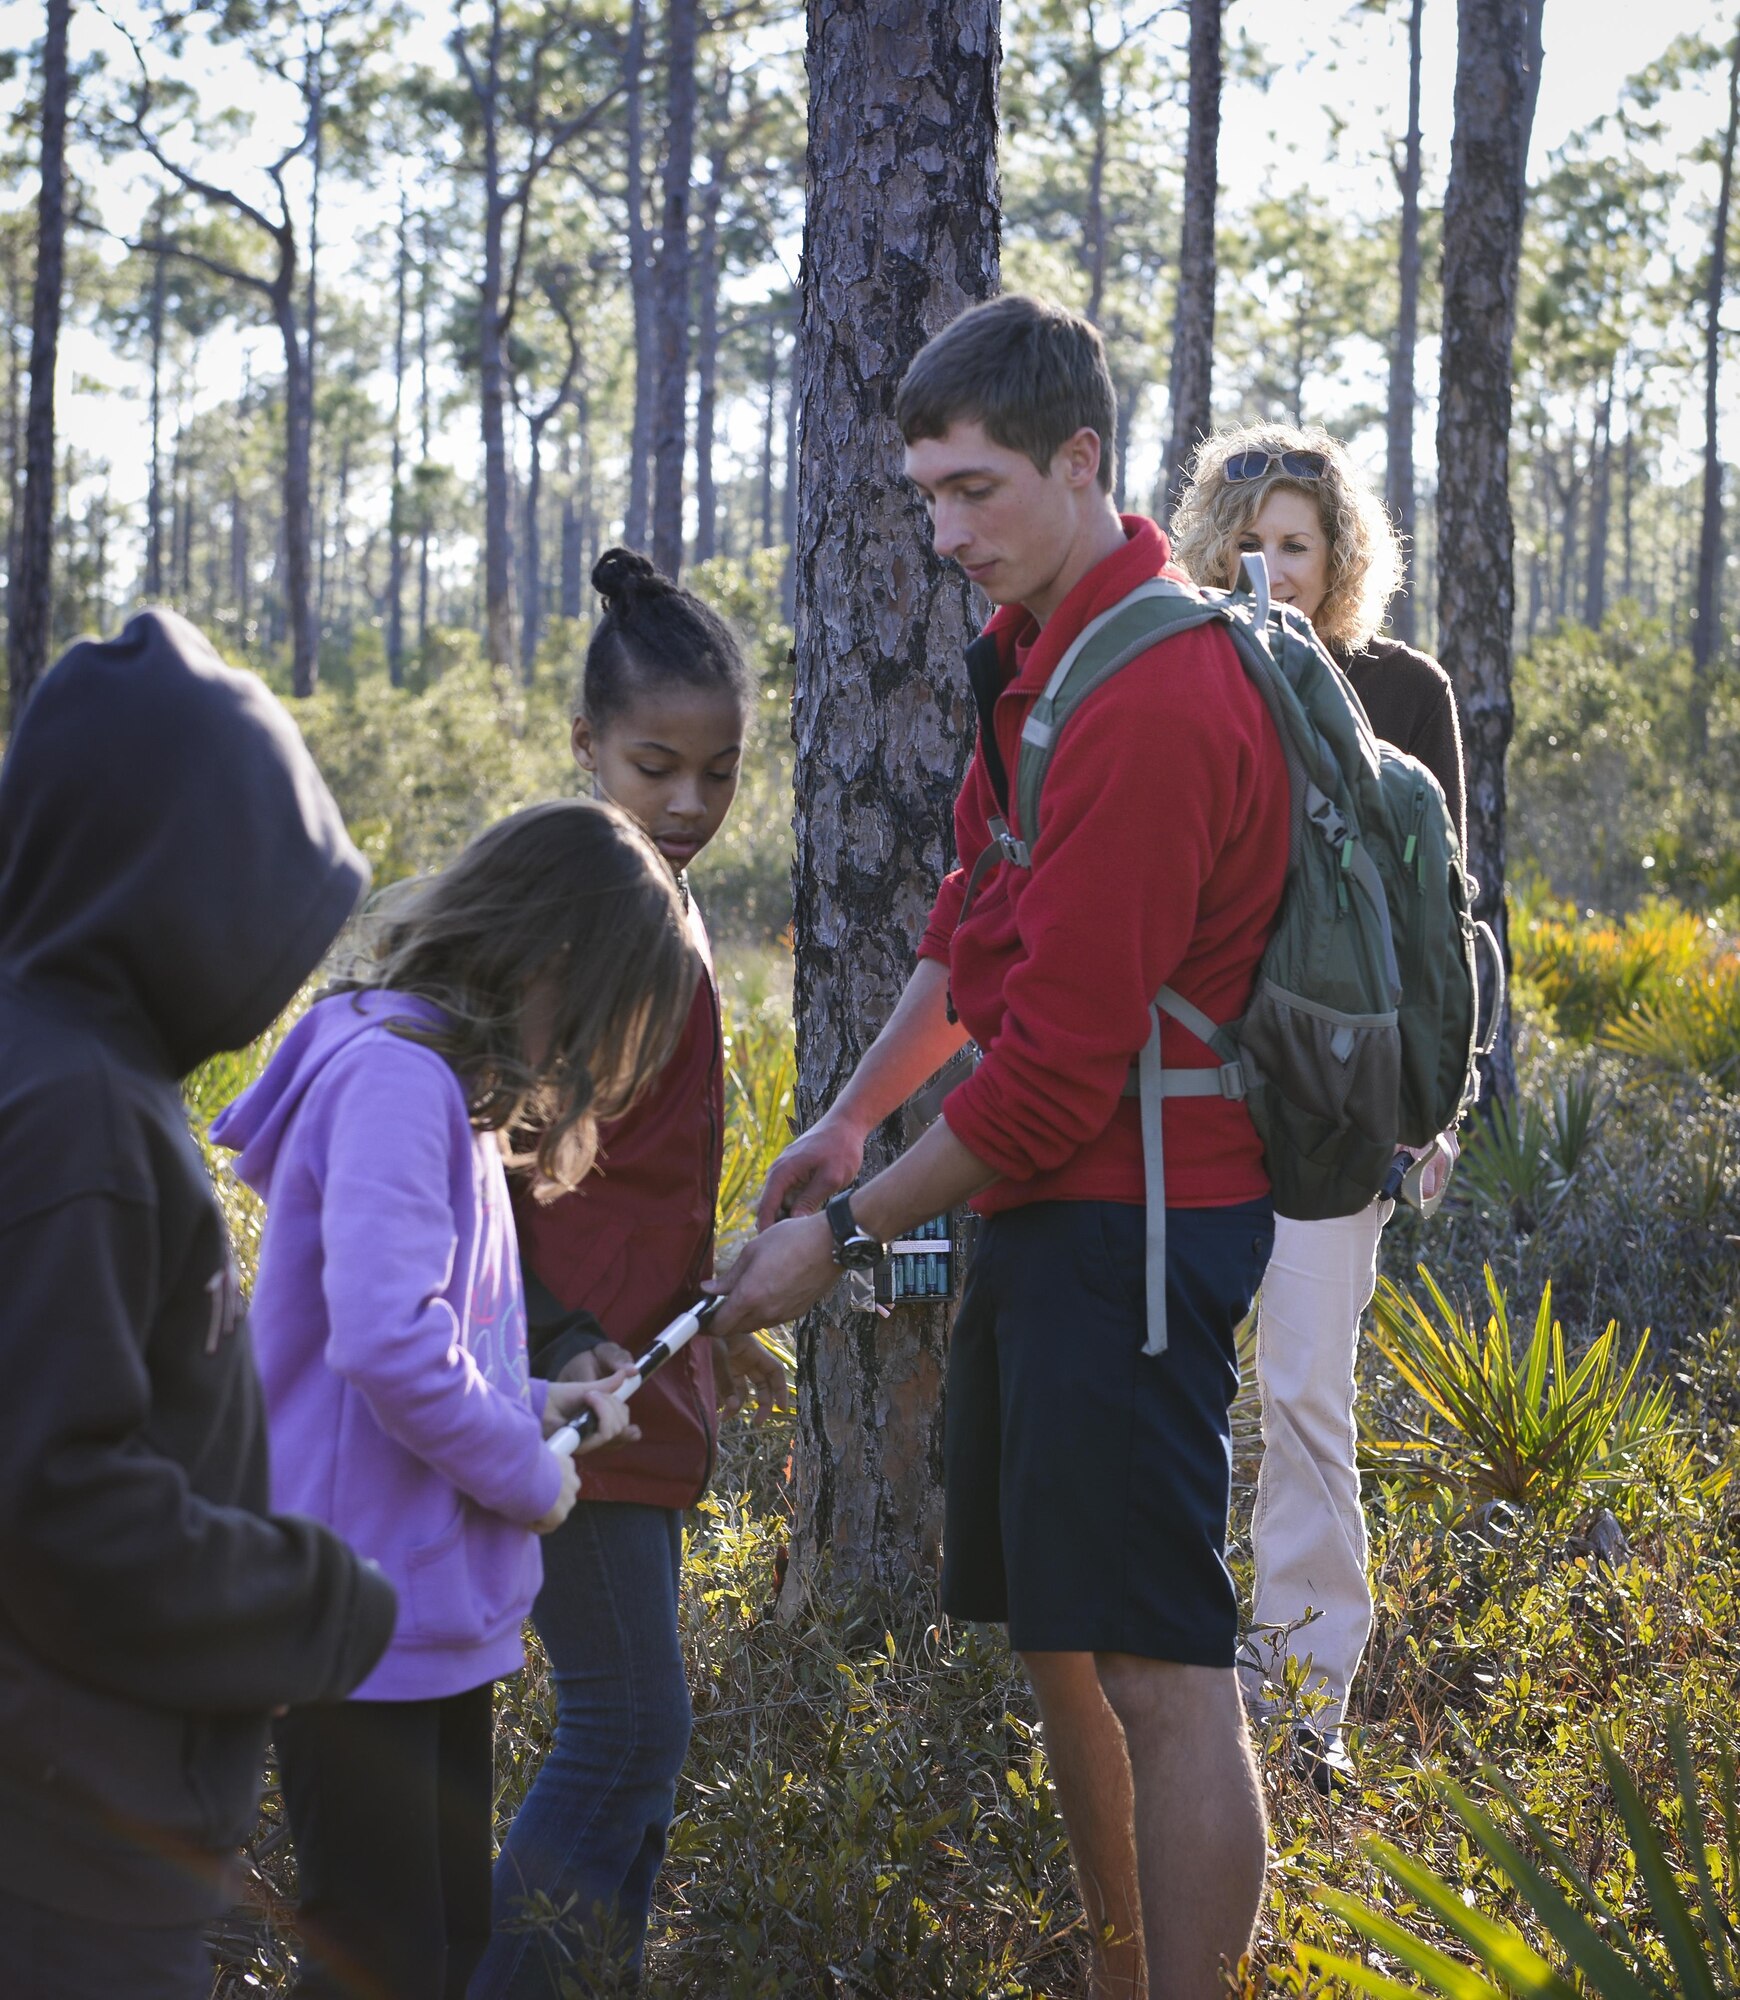 A walking stick is passed to each child to measure the distance between trees at Hurlburt Field, Fla., Feb. 5, 2015. Locations on Hurlburt are randomly selected and mapped by the Smithsonian Institute, to ensure a diversity of habitats for wildlife cameras to capture over the next few months. (U.S. Air Force photo Senior Airman Meagan Schutter/Released)